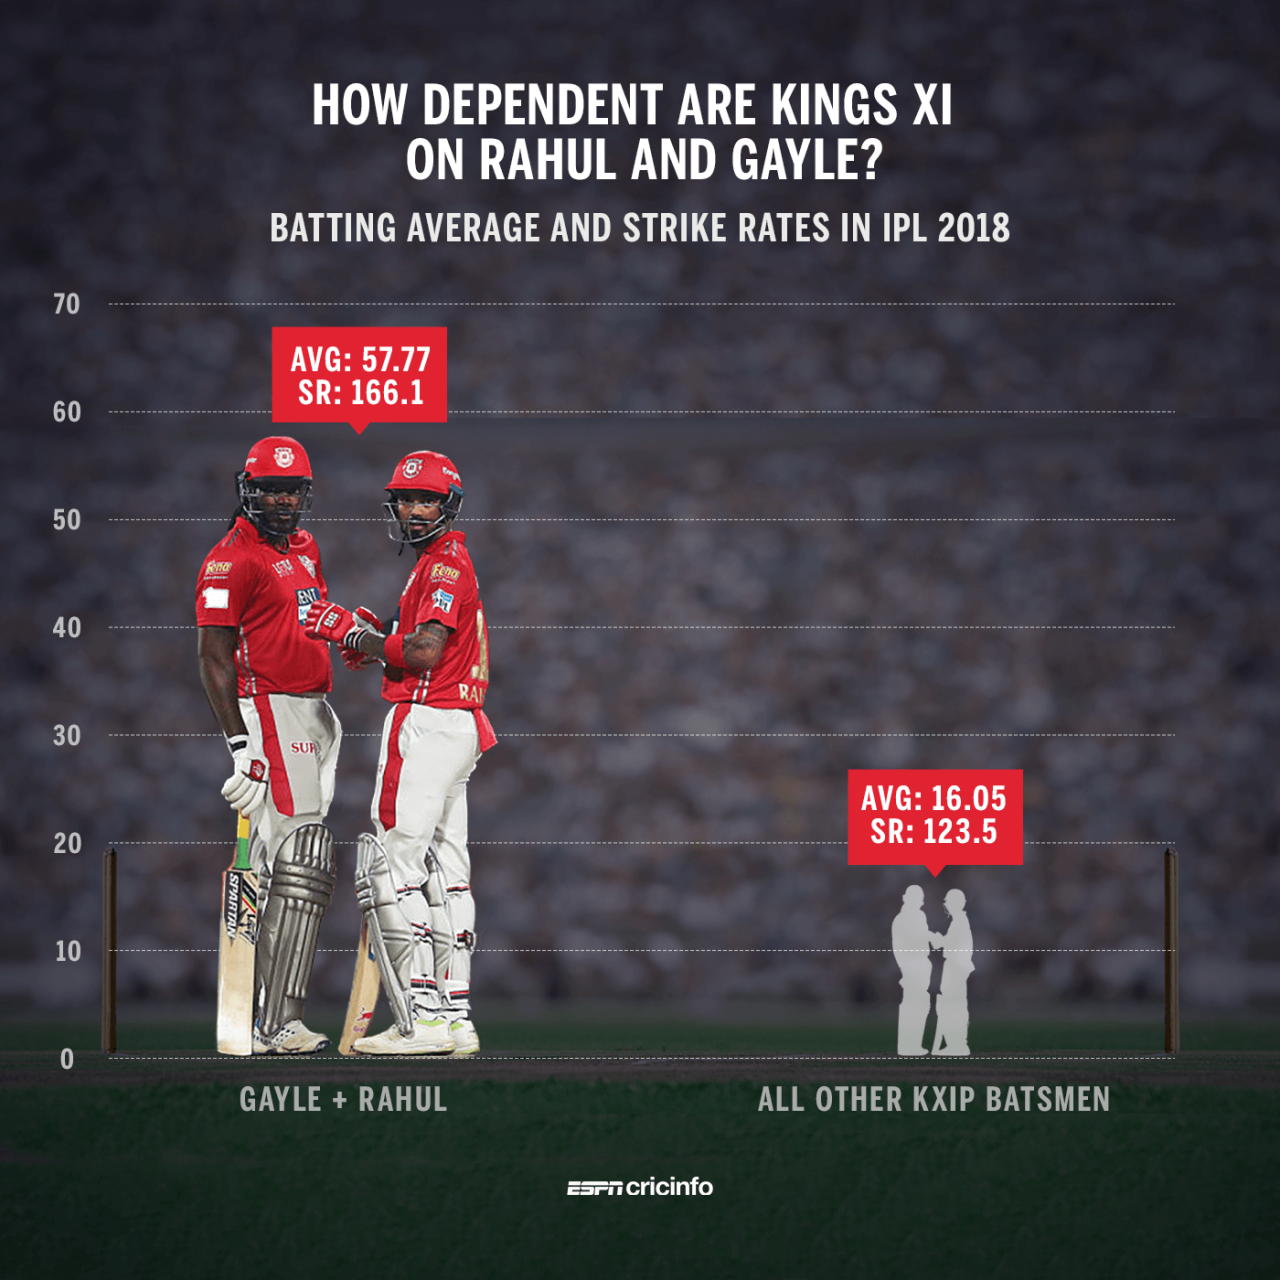 Gayle and Rahul scored a combined 55 runs off 48 balls, but it wasn't enough to take Kings XI home